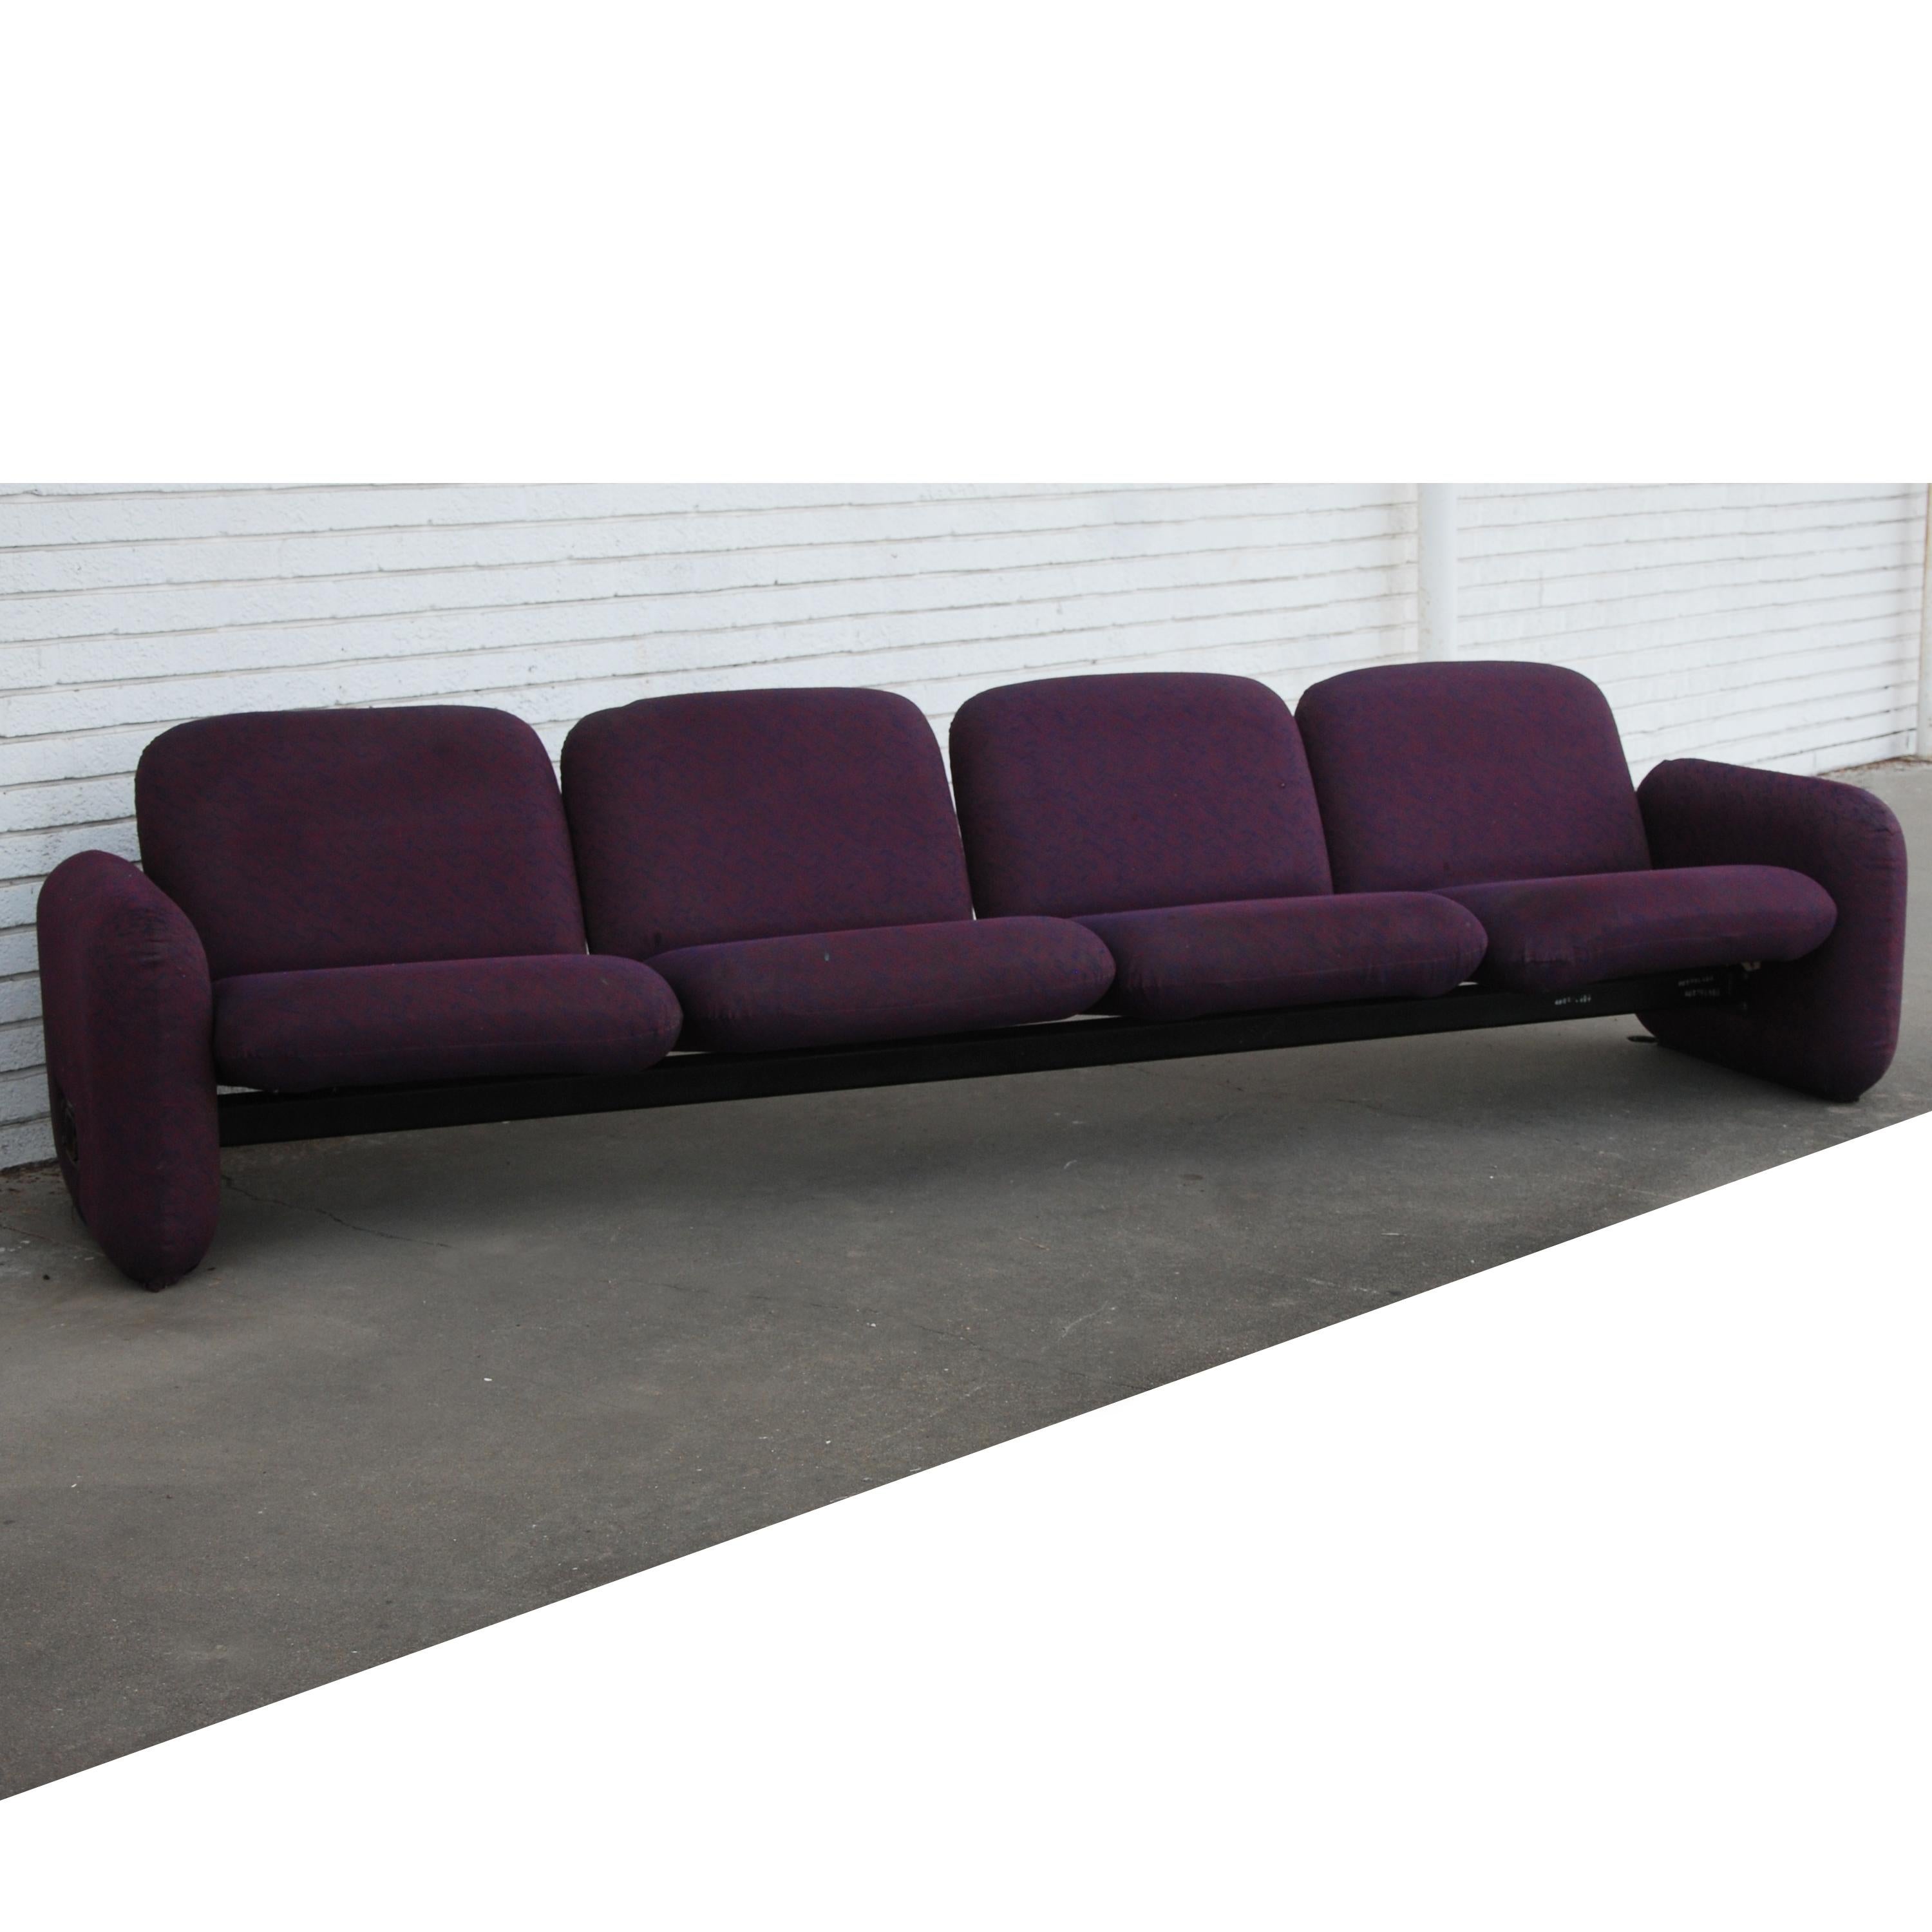 Chiclet Modular 4-Seat Sofa by Ray Wilkes In Good Condition For Sale In Pasadena, TX